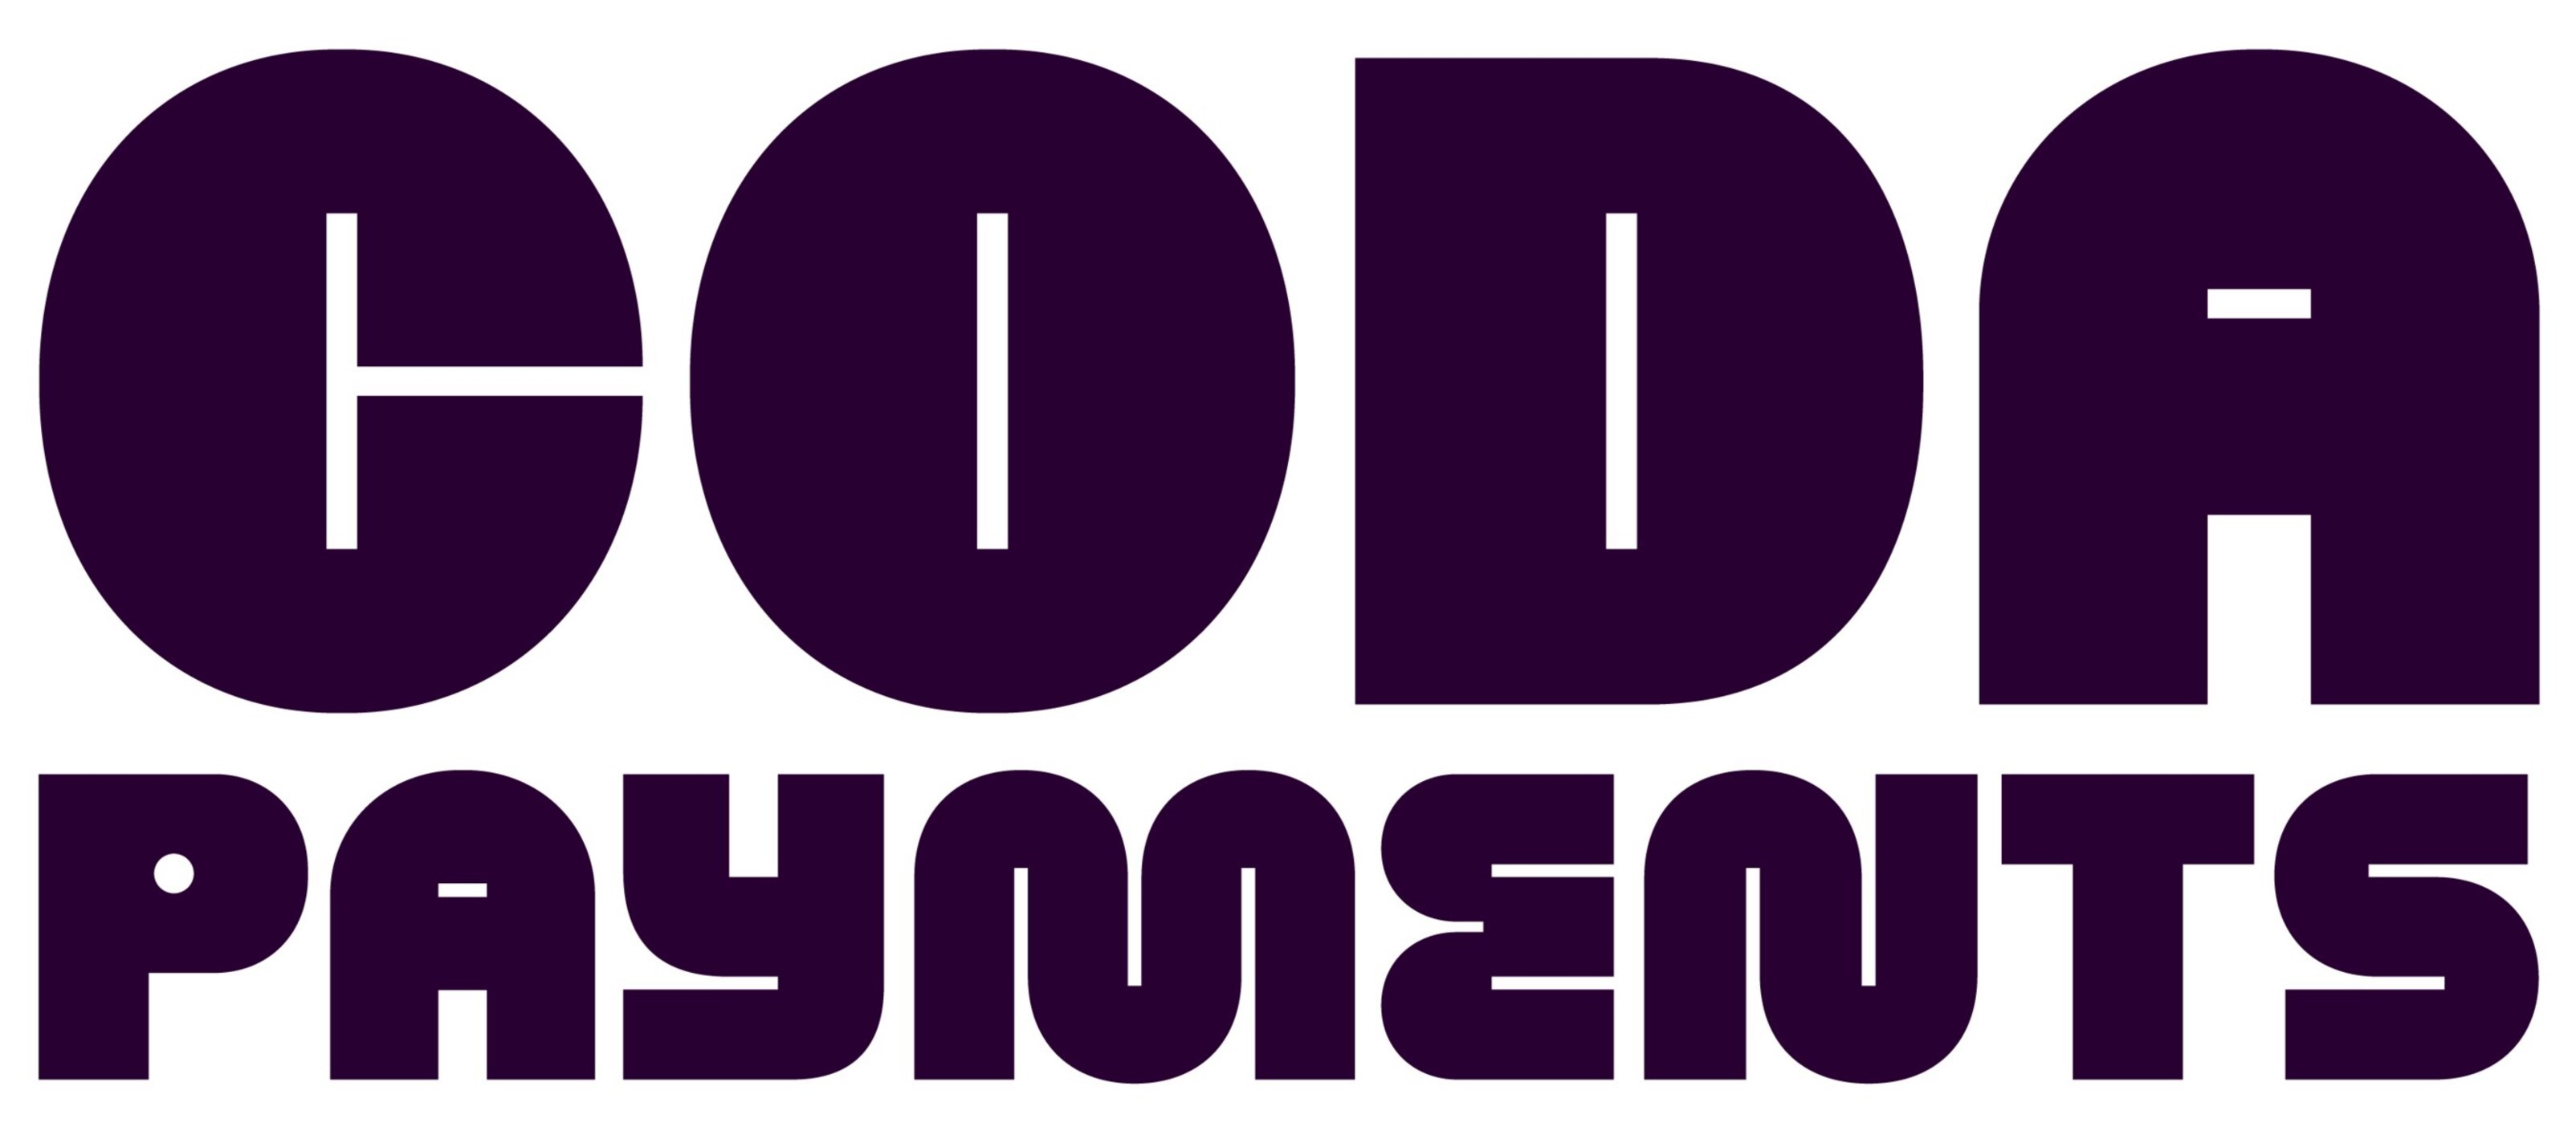 Coda Paymentsロゴ